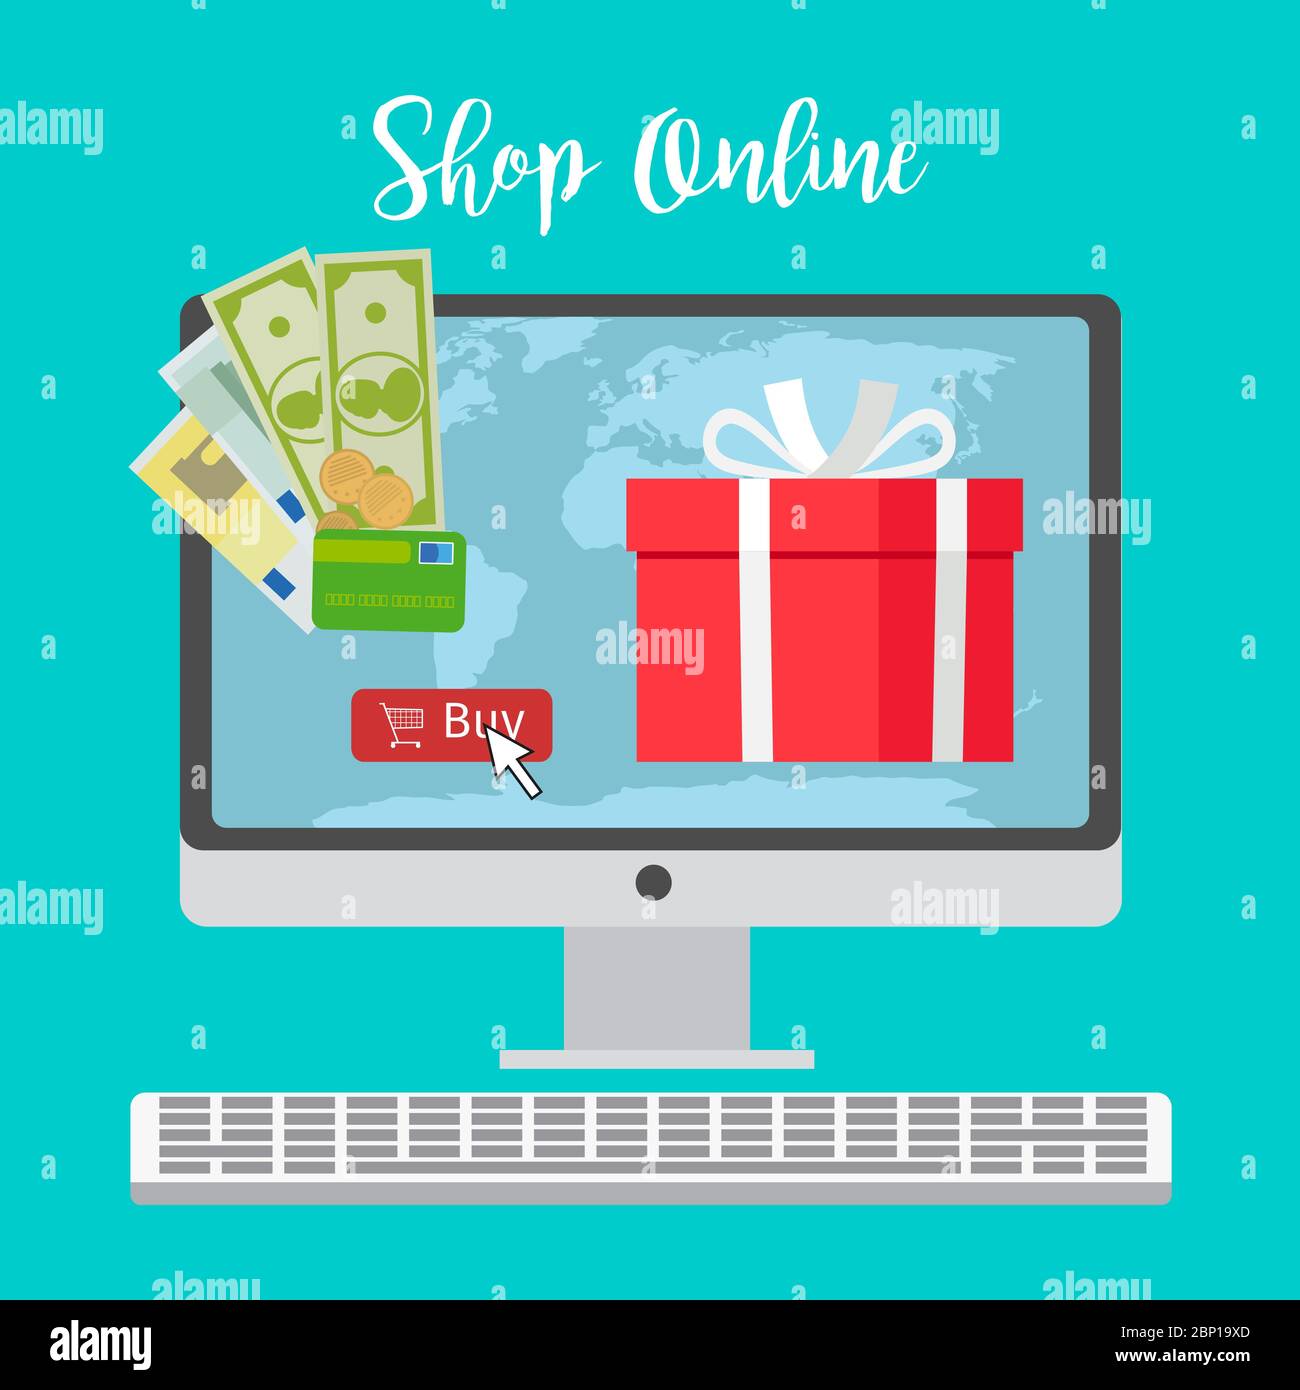 Shop online concept with red present and all world map on the screen, vector illustration Stock Vector